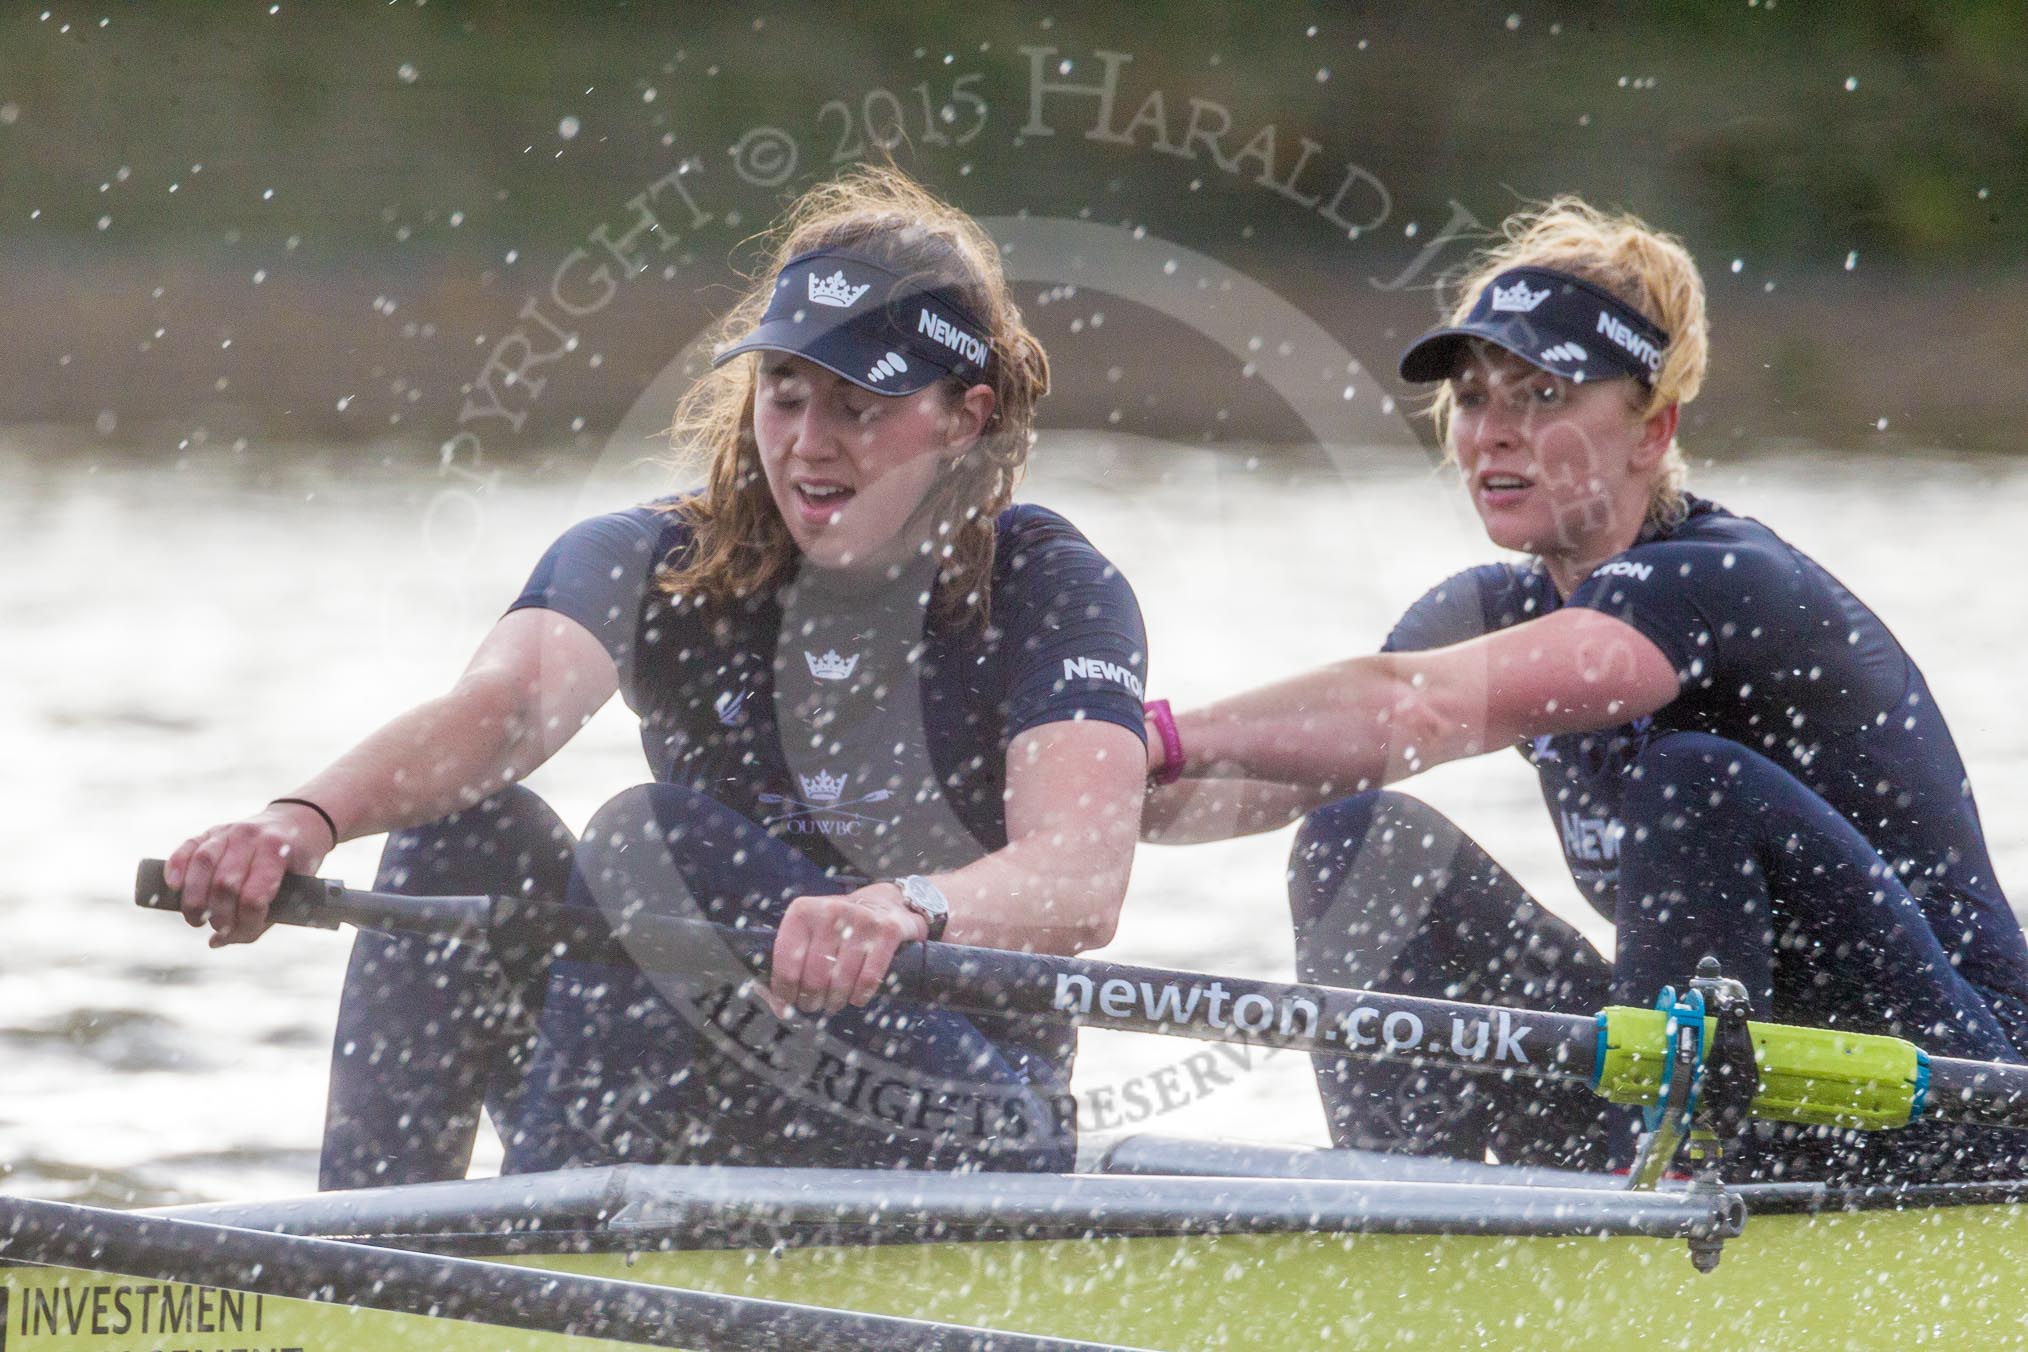 The Boat Race season 2016 - Women's Boat Race Trial Eights (OUWBC, Oxford): "Charybdis" , here 5-Ruth Siddorn, 4-Emma Spruce.
River Thames between Putney Bridge and Mortlake,
London SW15,

United Kingdom,
on 10 December 2015 at 12:29, image #255